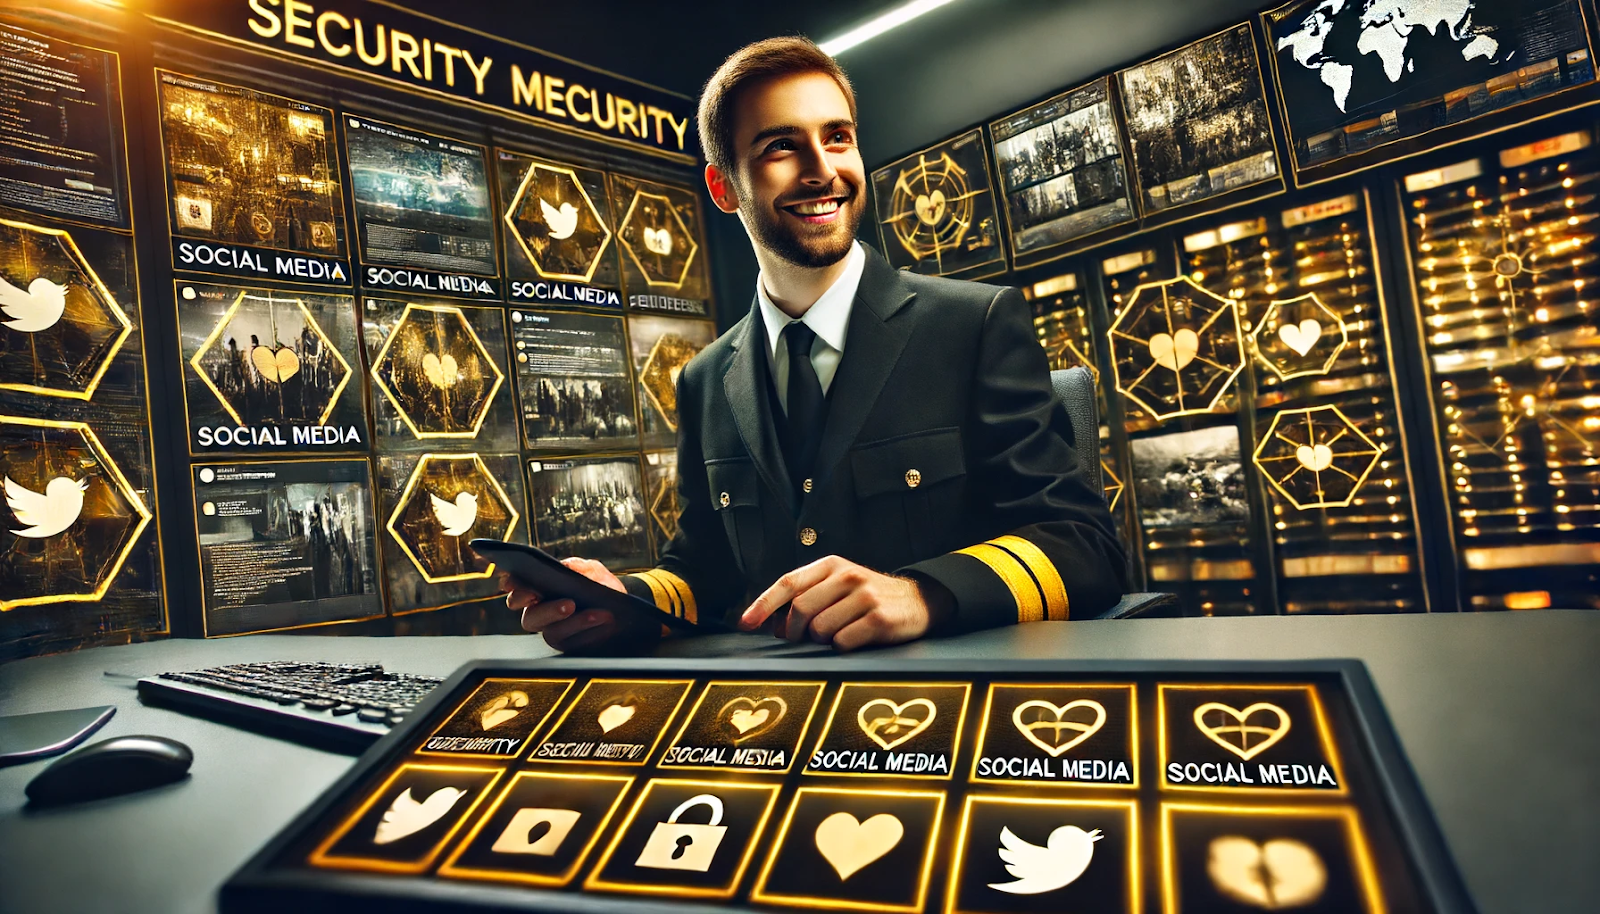 Cheerful security guard monitoring social media feeds in a control room, highlighting security monitoring tools.